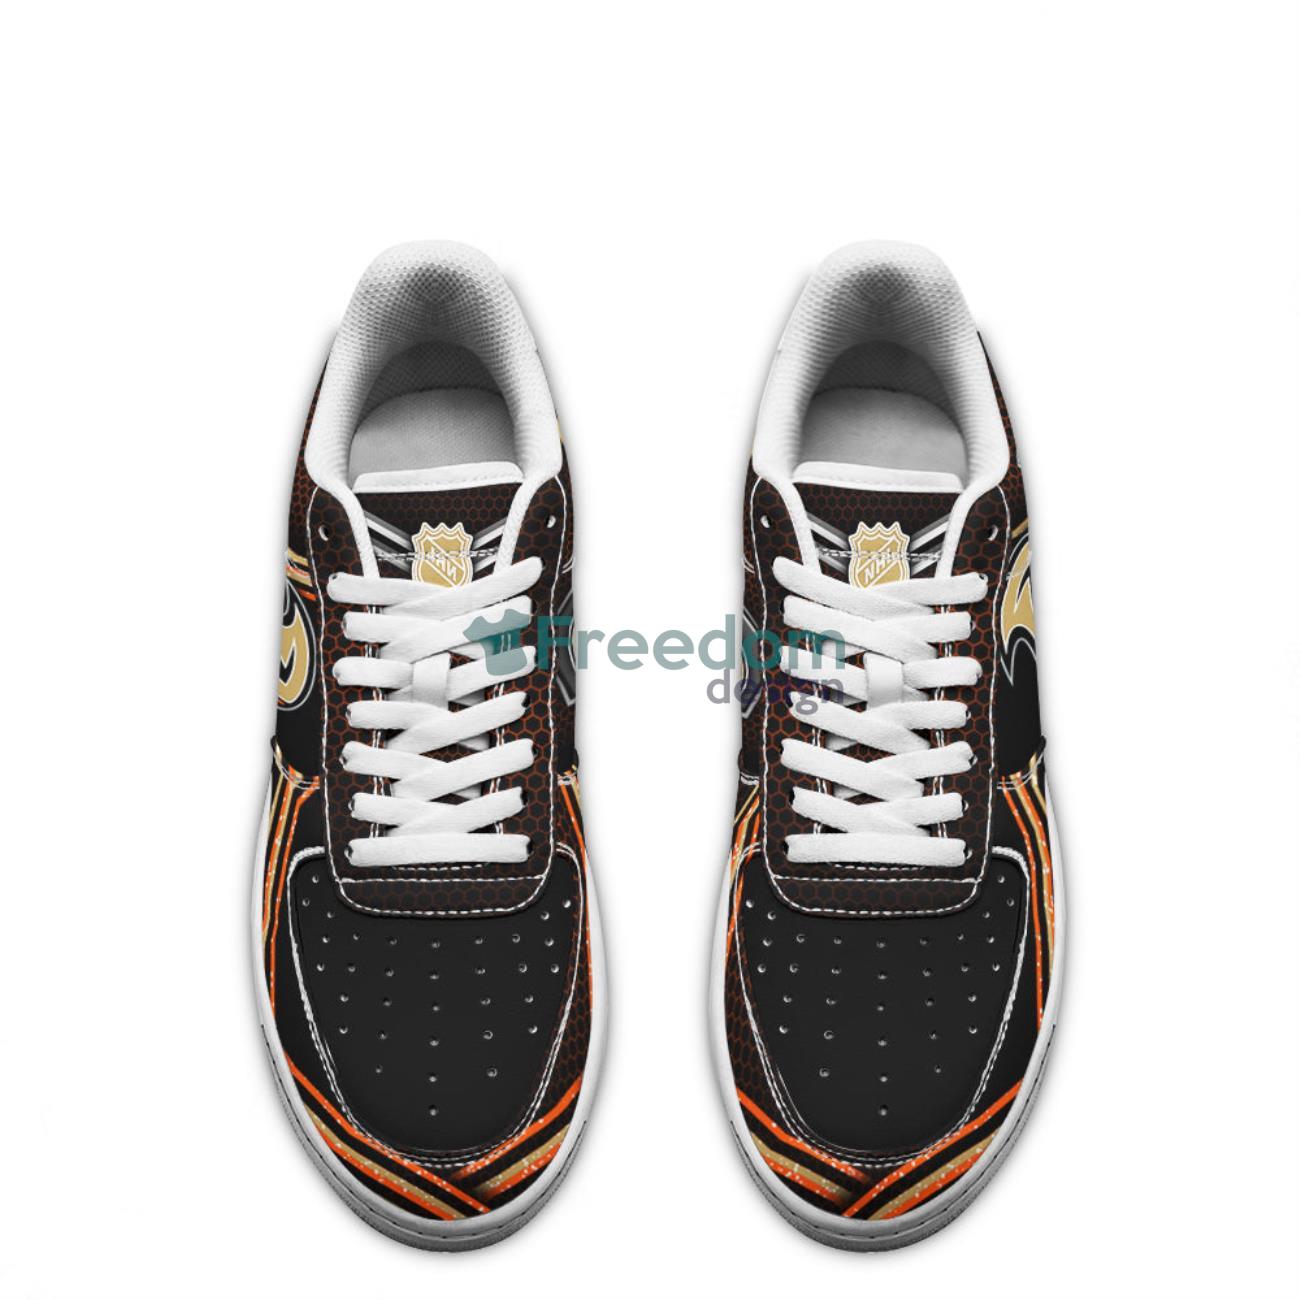 Anaheim Ducks Sport Lover Air Force Shoes For Fans